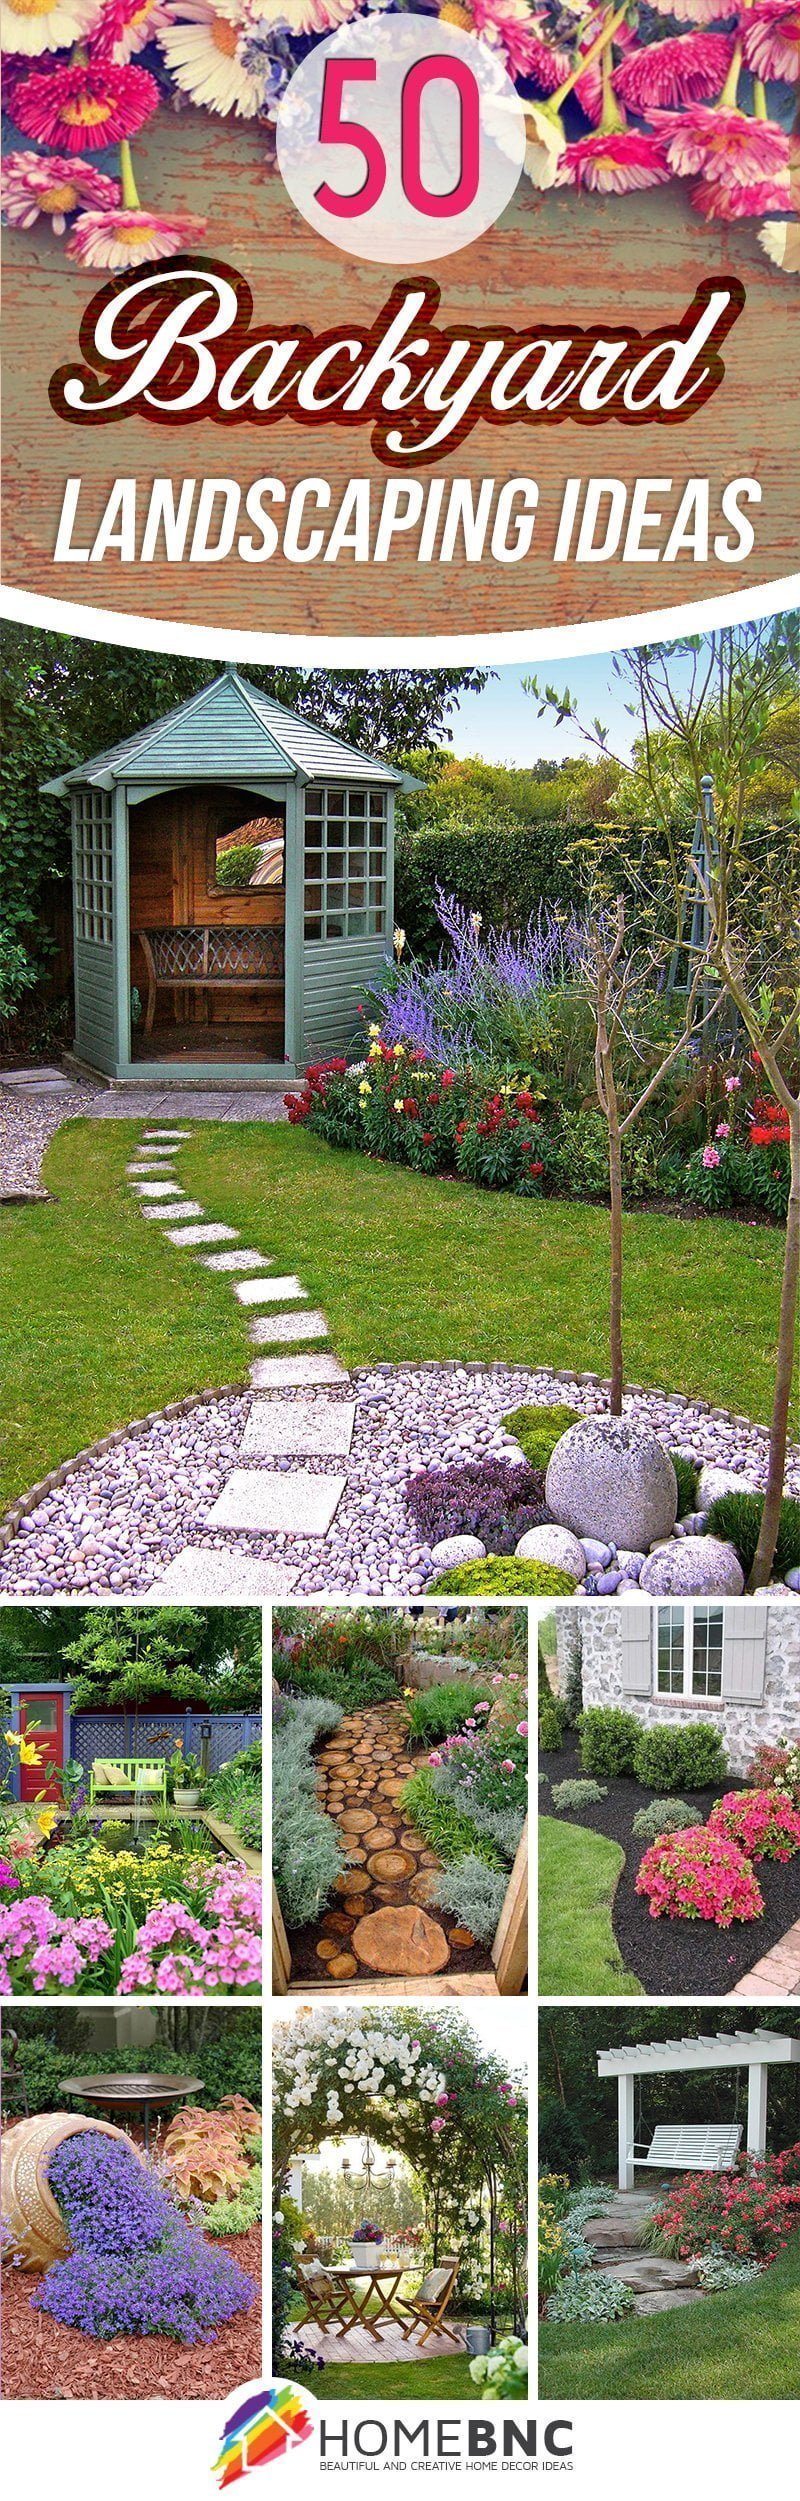 50 Best Backyard Landscaping Ideas and Designs in 2017